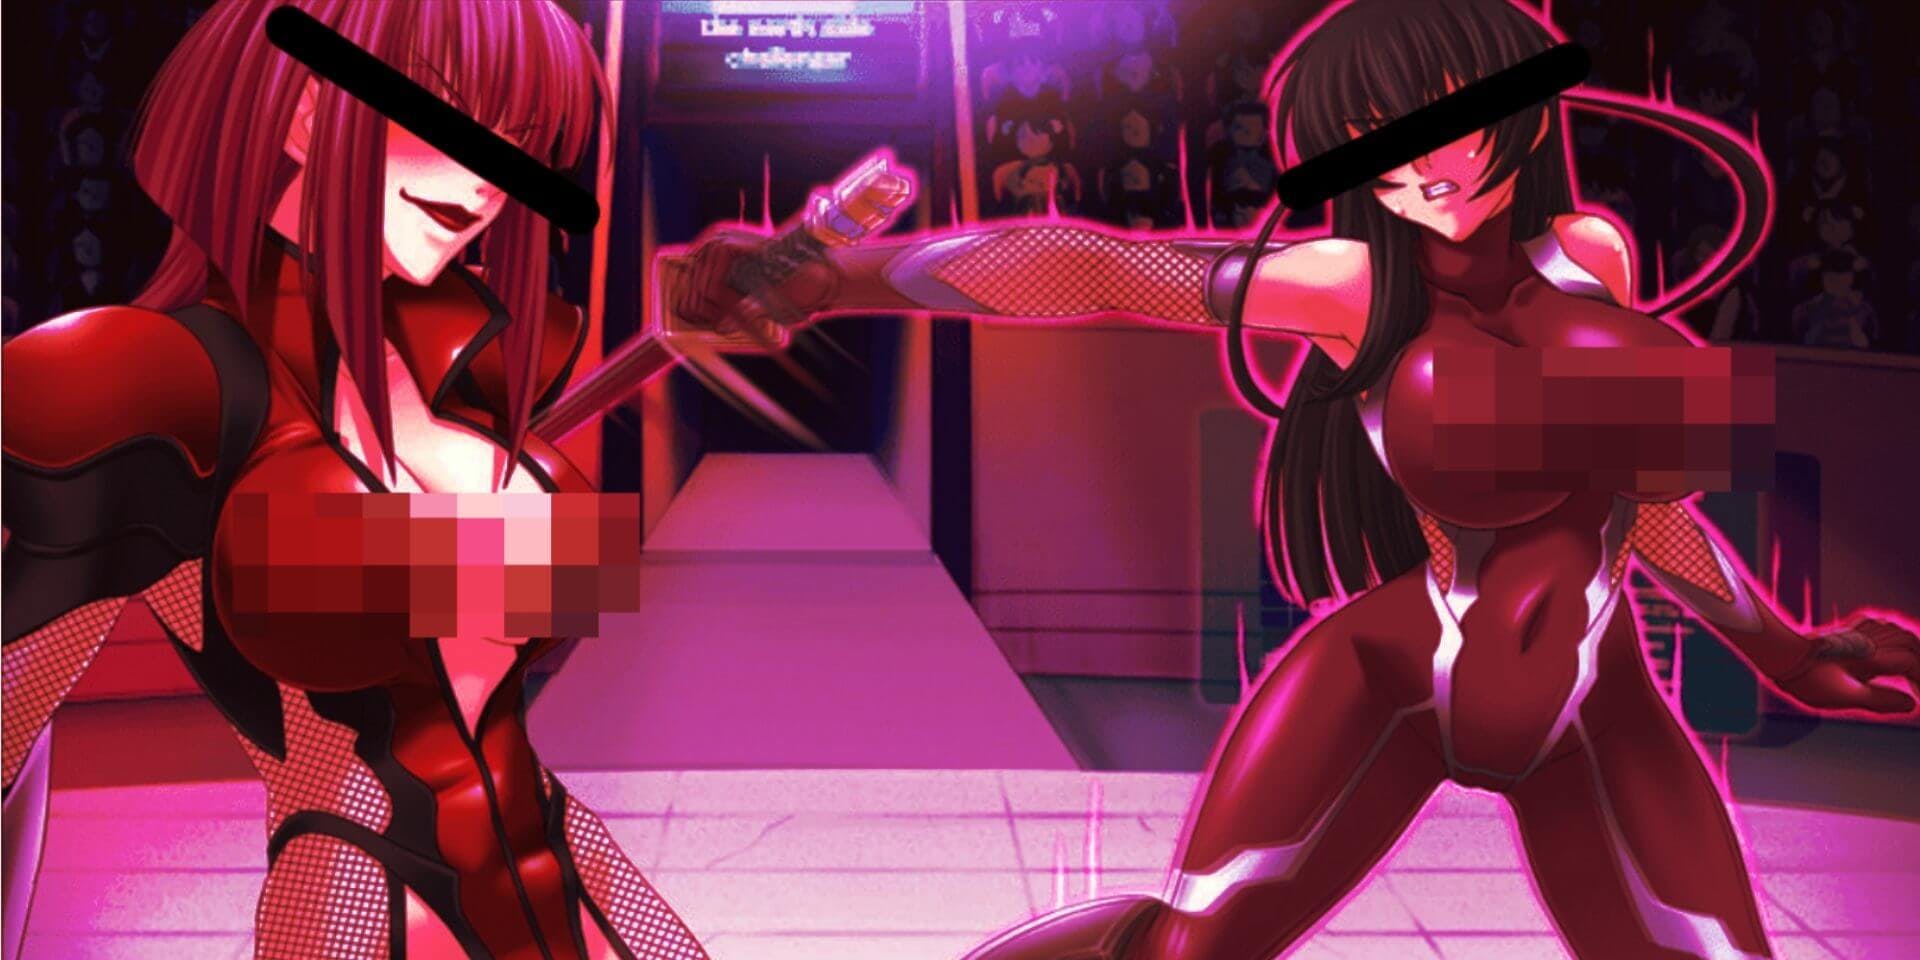 Creators fear censorship after Steam pulls controversial adult game